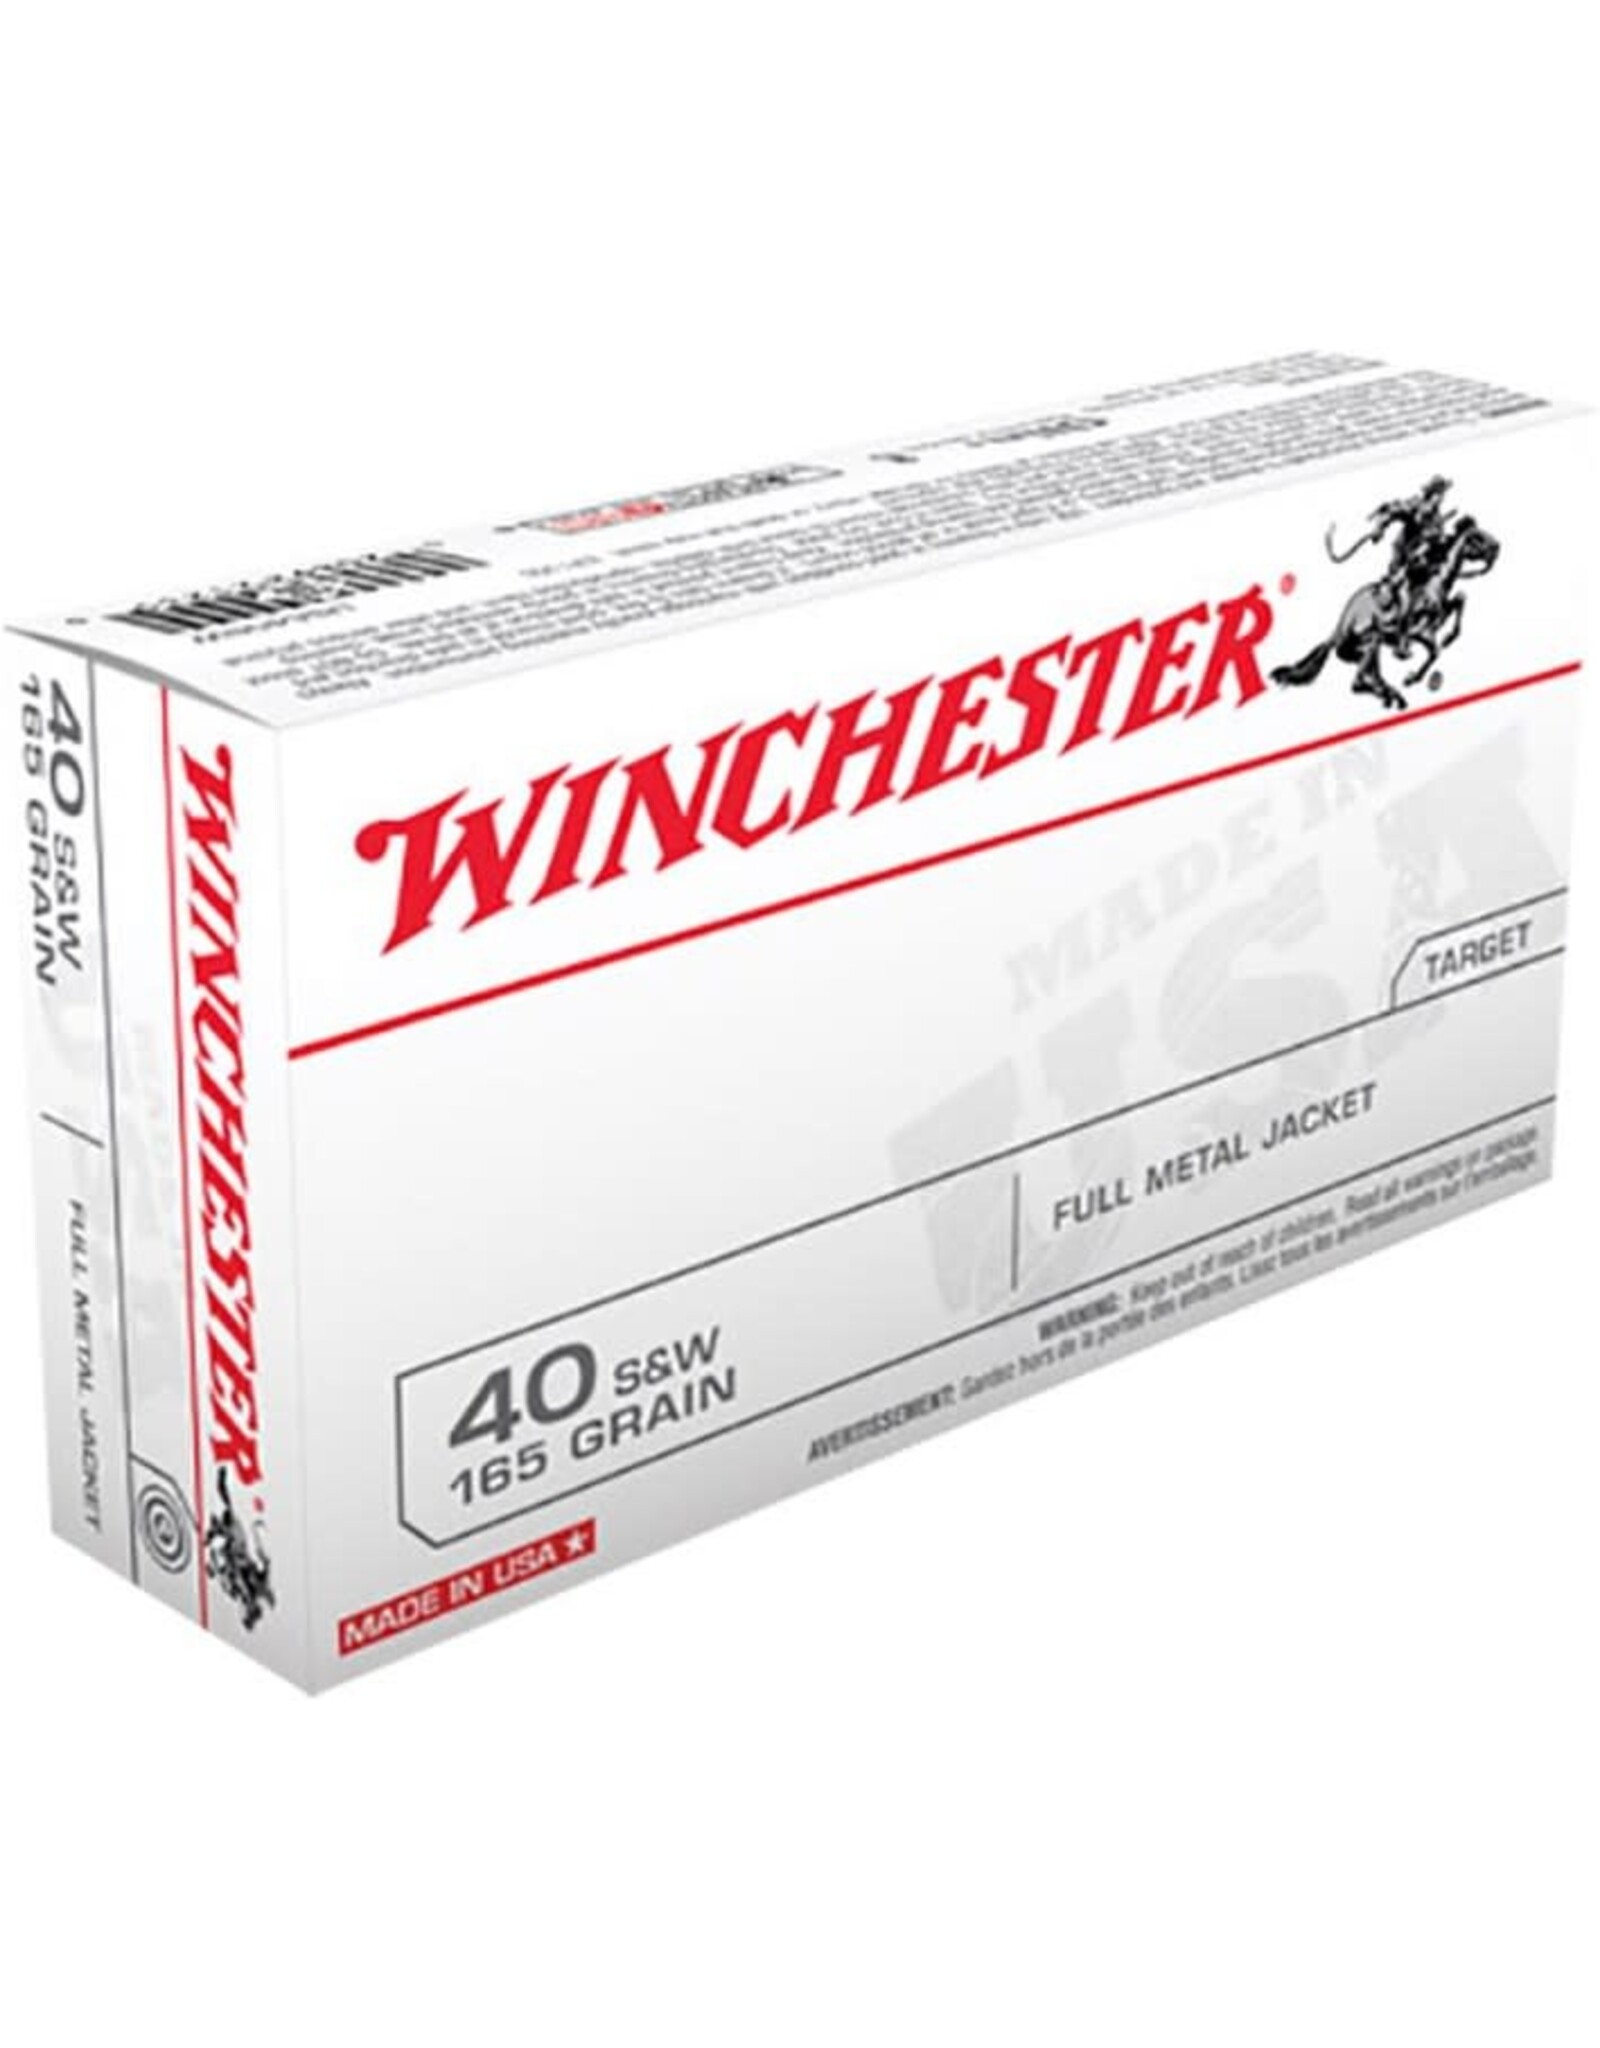 Winchester USA .40 S&W 0165 Gr FMJ - 50 Count